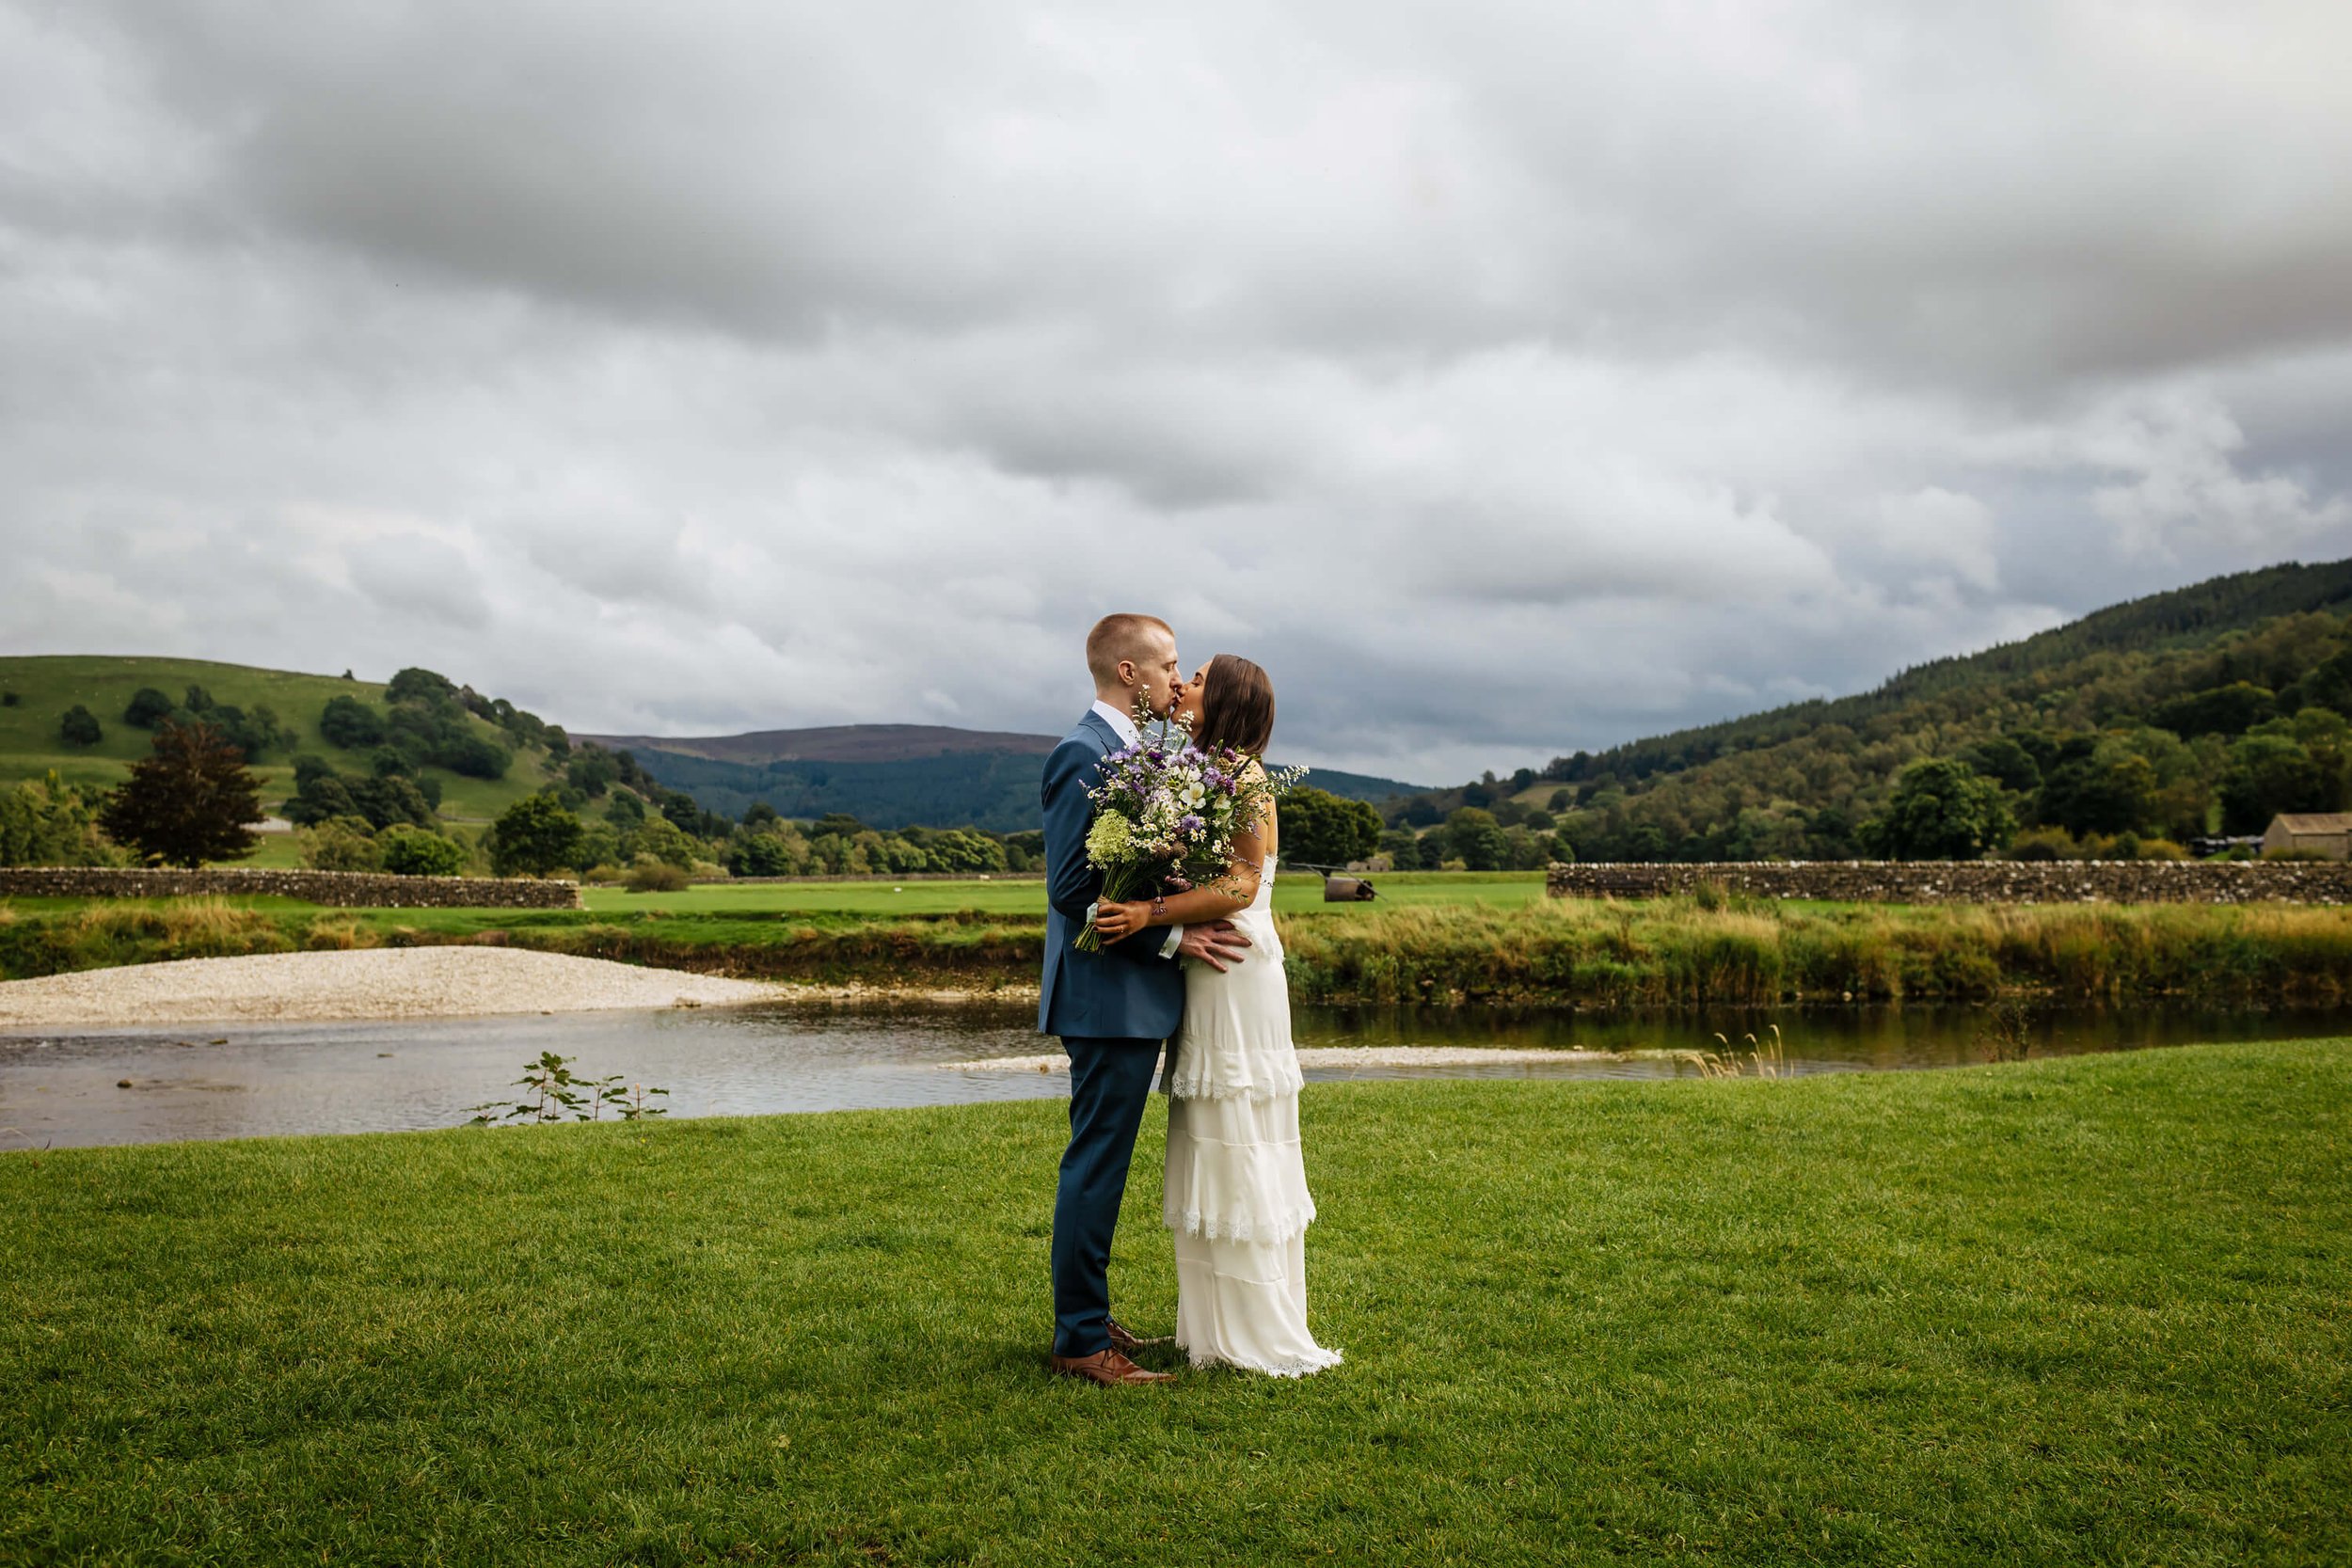 Bride and groom portrait at a Yorkshire wedding